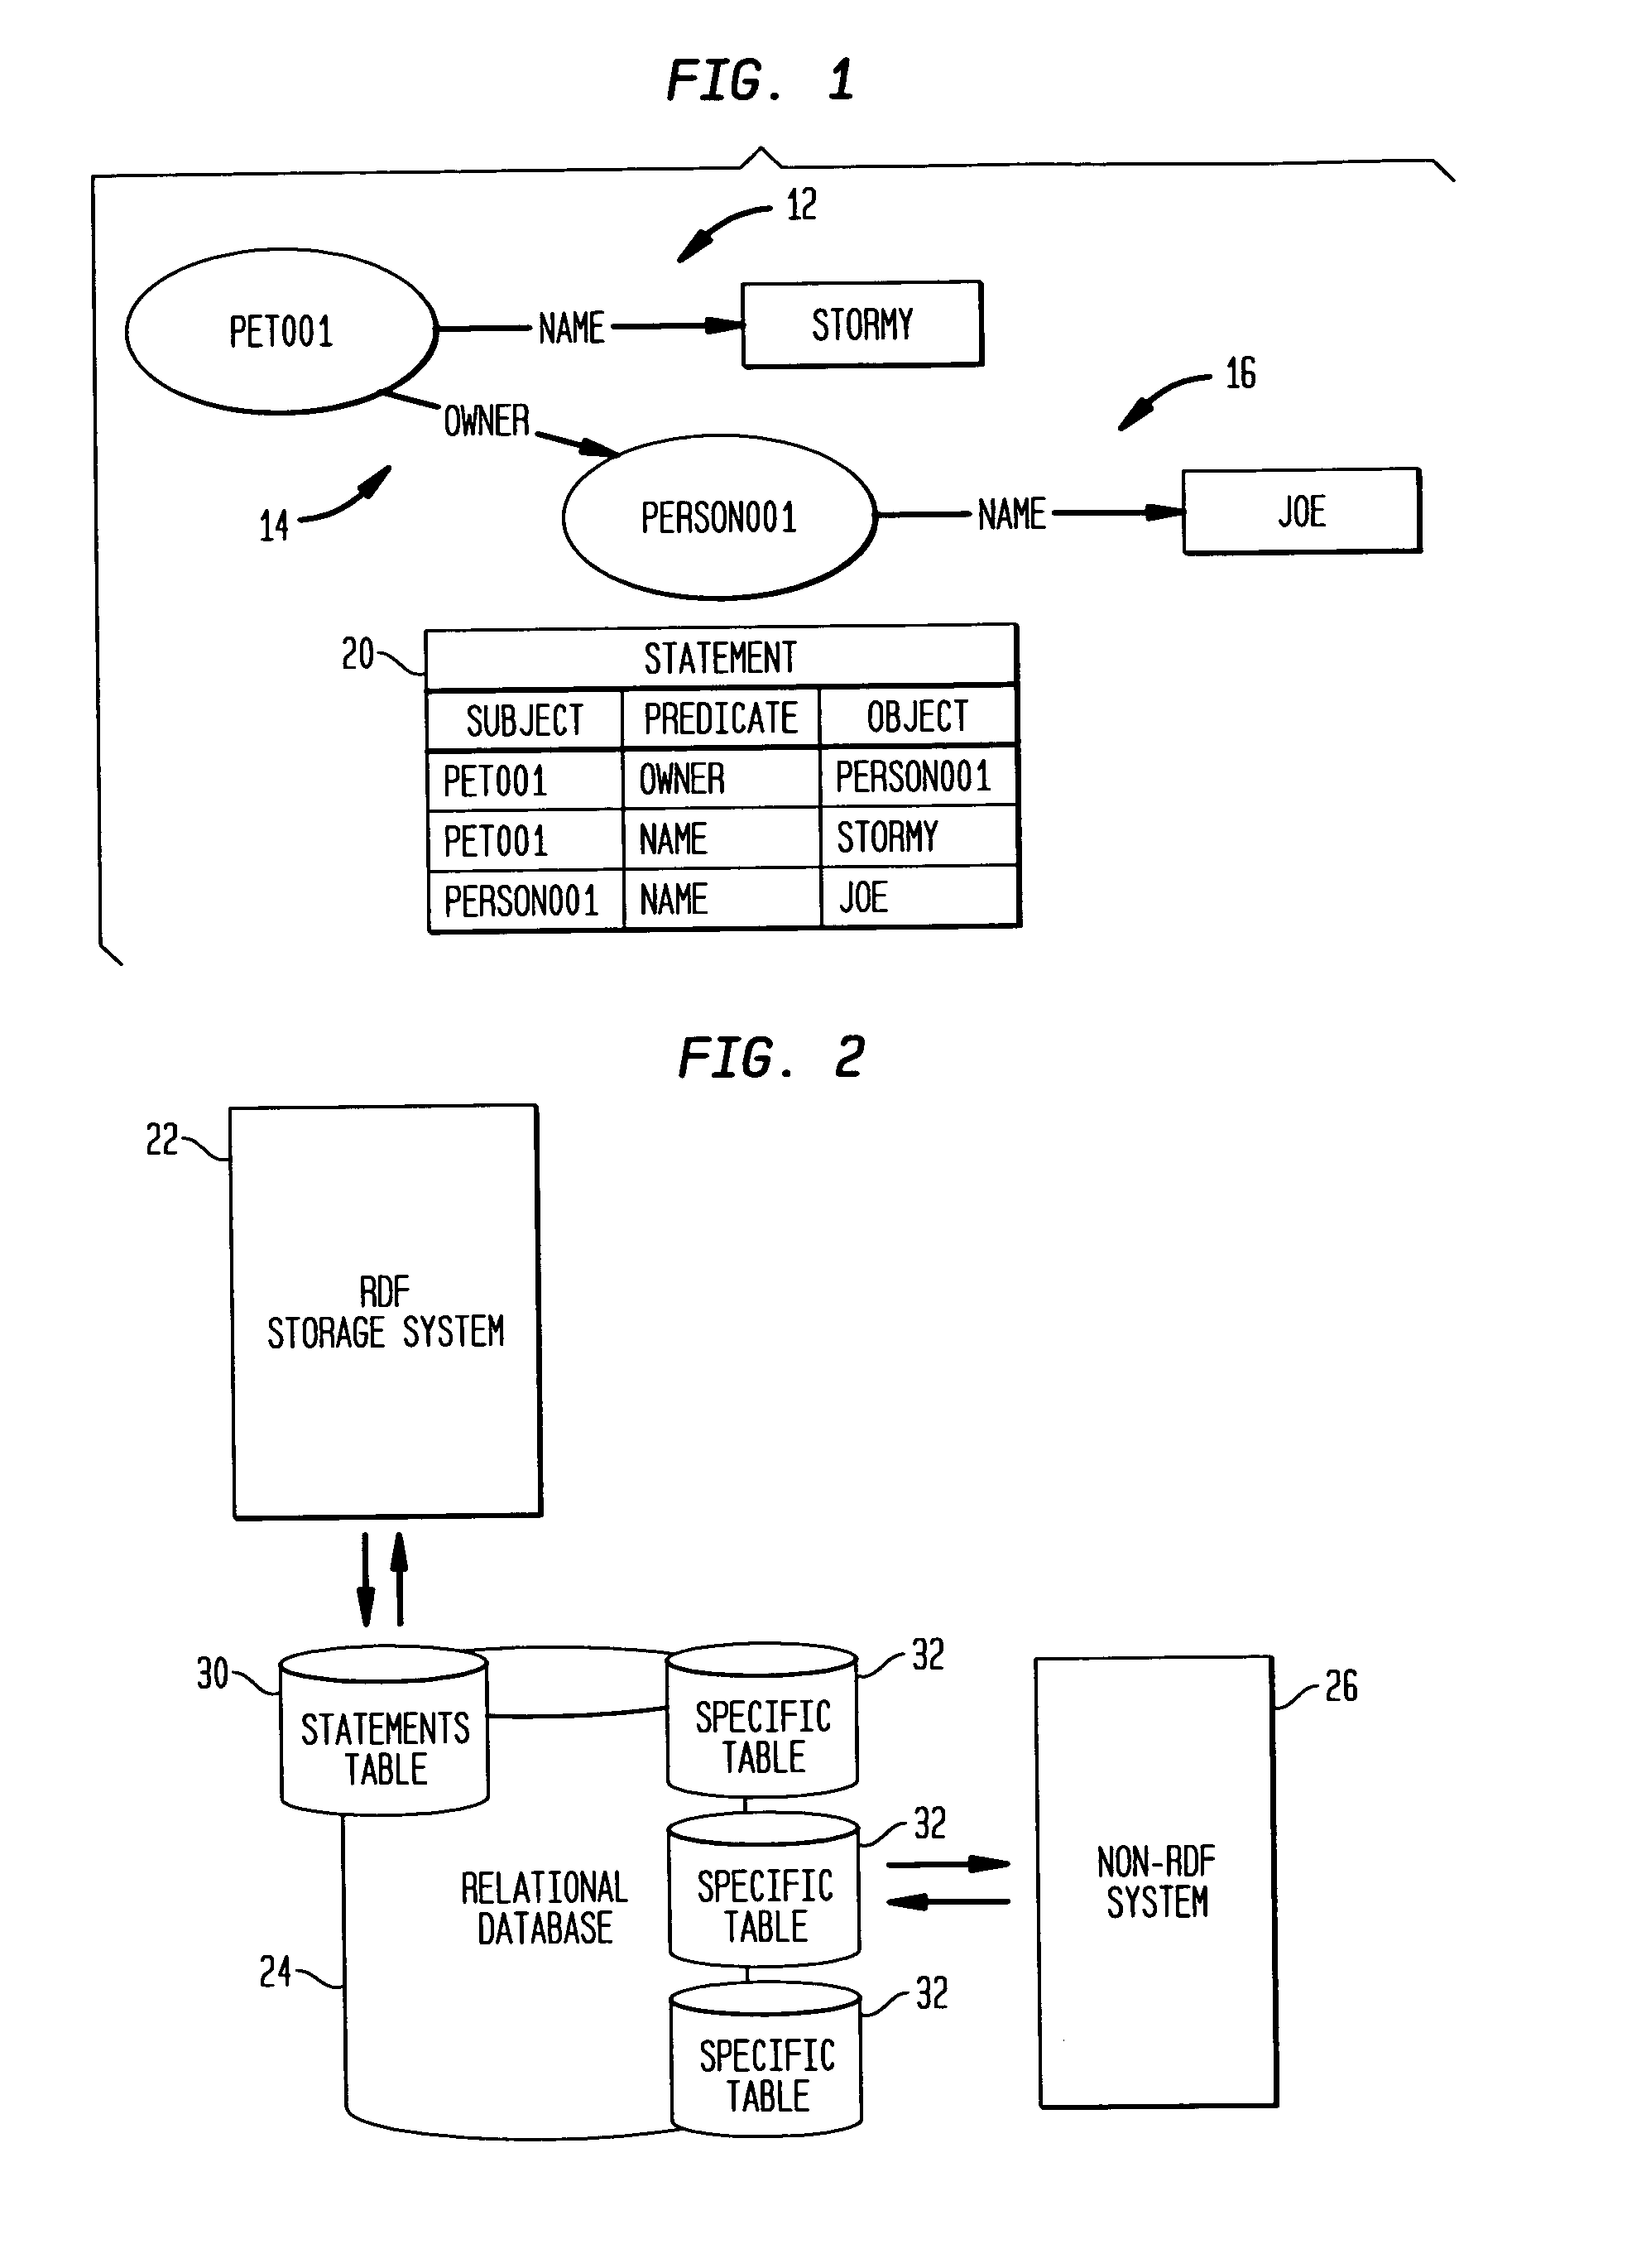 Method and system for controlling access to semantic web statements